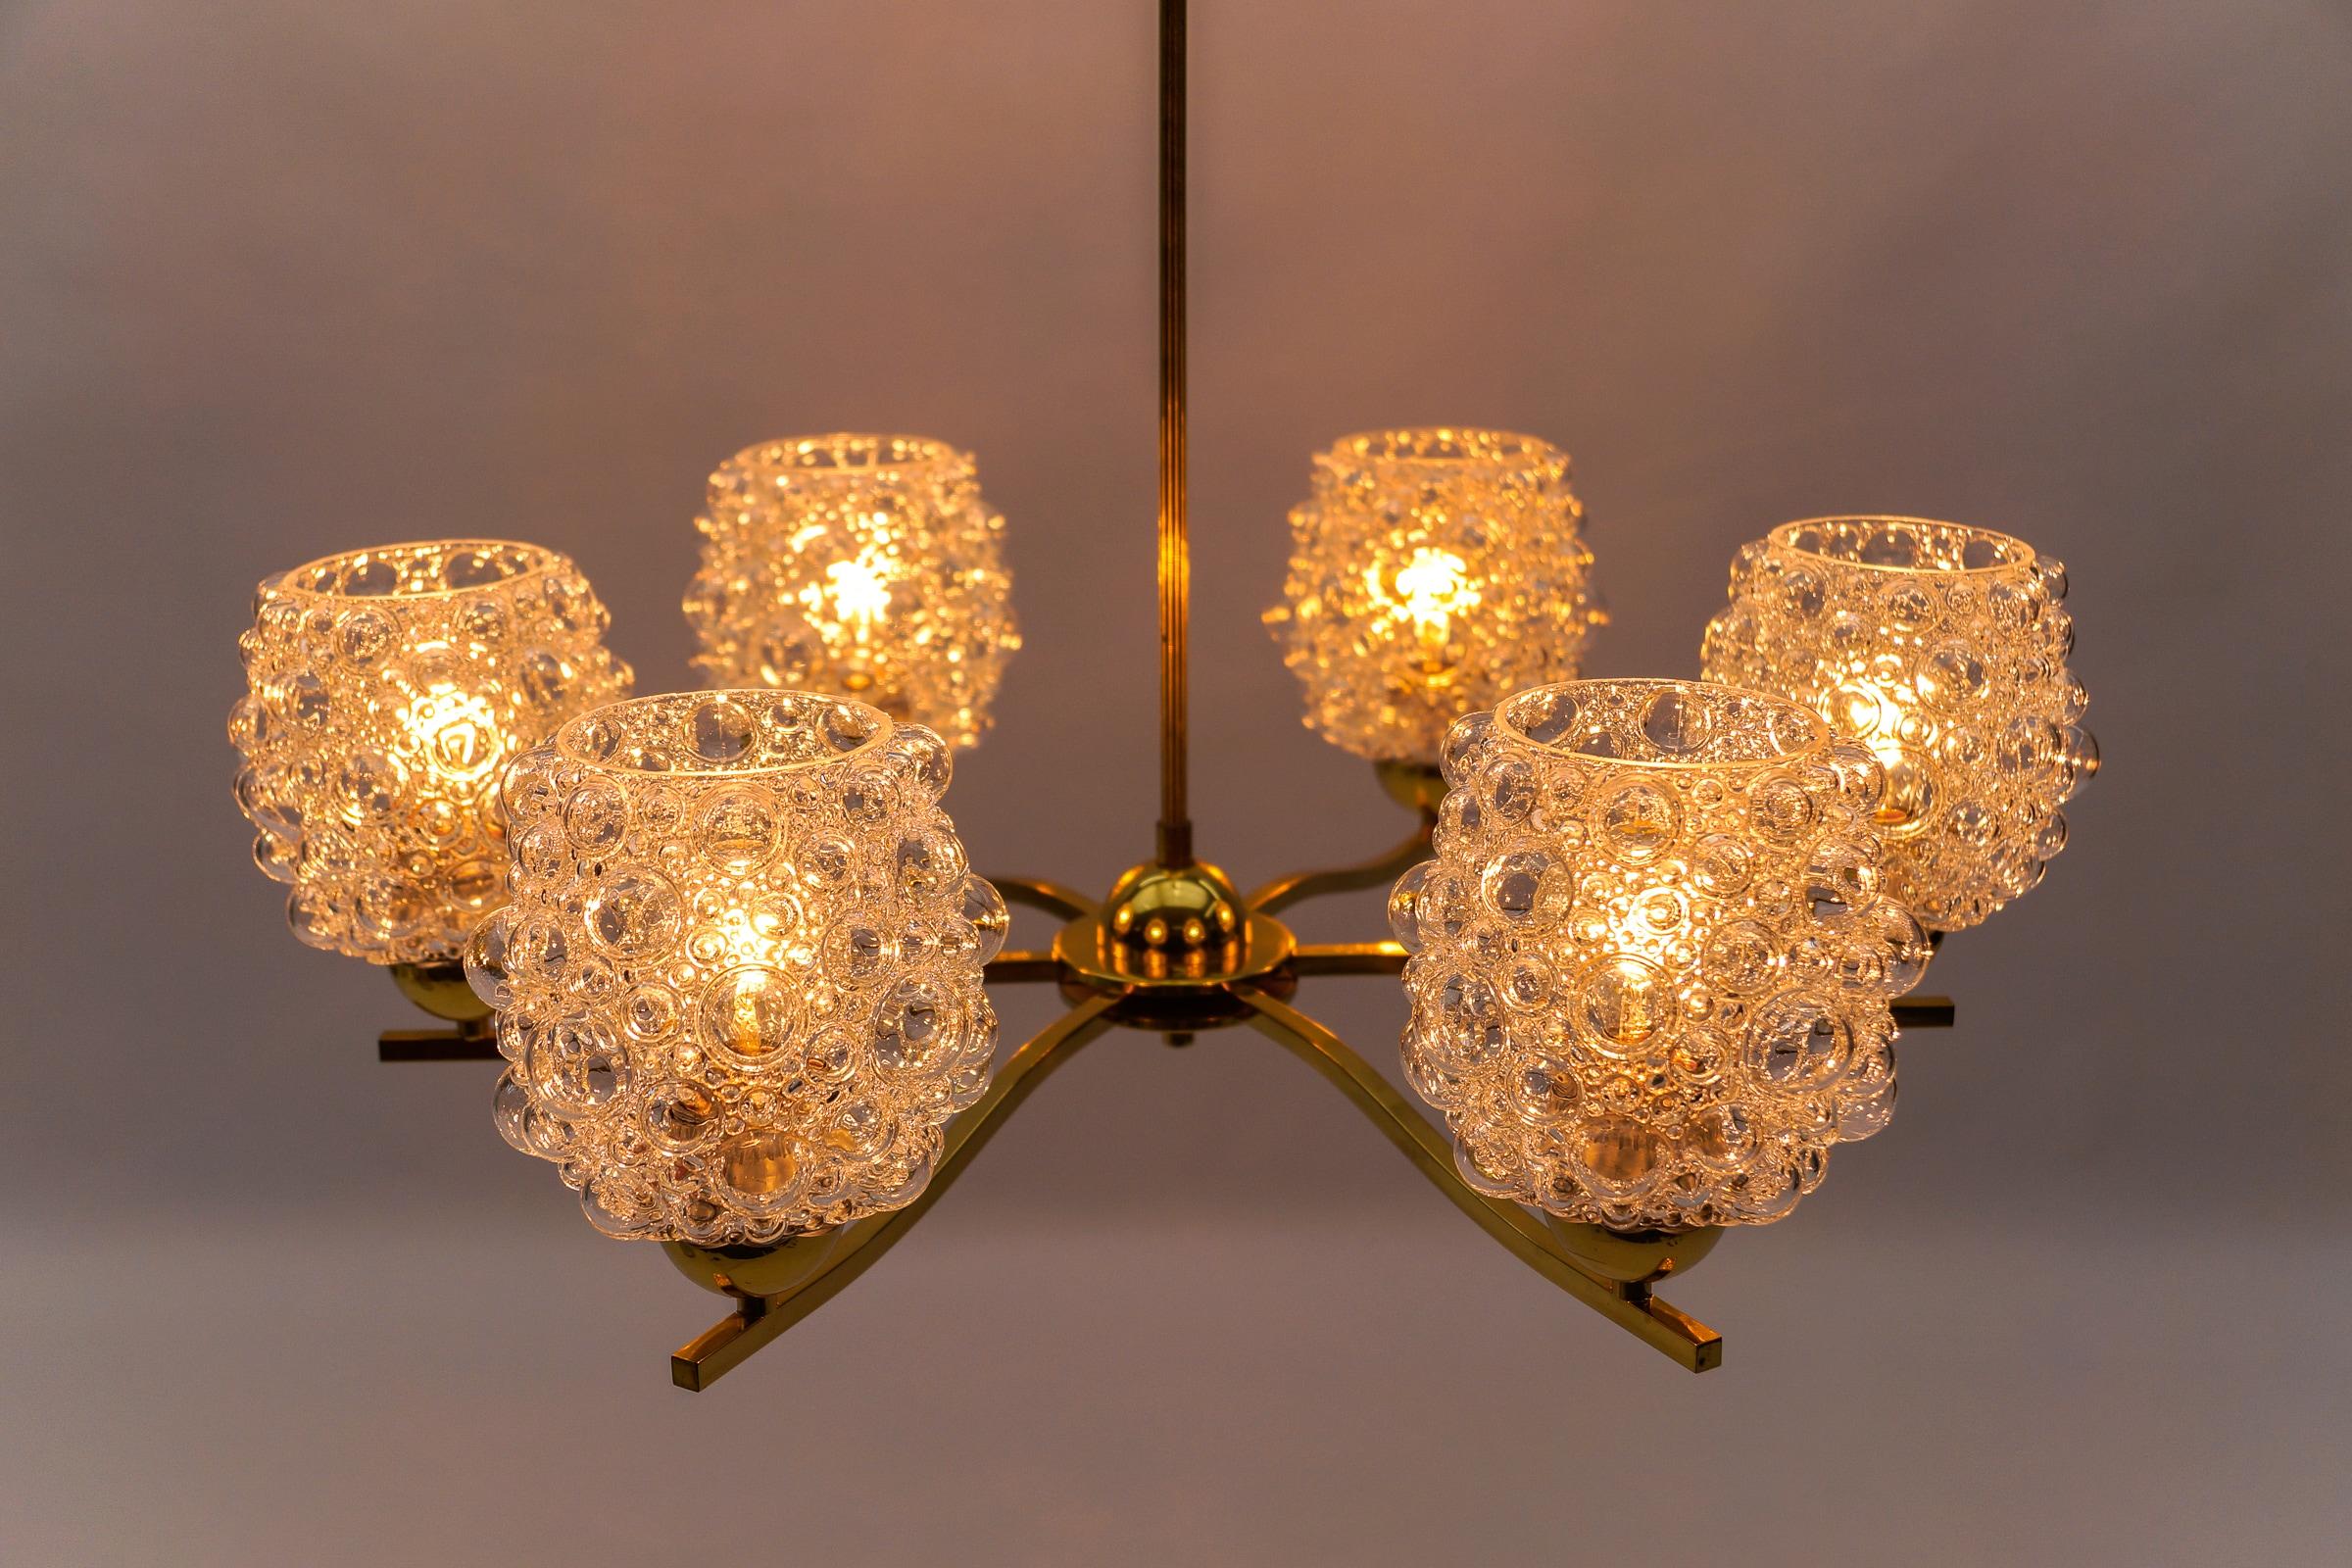 Awesome Bubble Glass Ceiling Lamp by Helena Tynell for Limburg, Germany 1960s

Executed in glass, metal and brass. The lamp needs 6 x E27 Edison screw fit bulb, is wired, in working condition and runs both on 110 / 230 volt.

Our lamps are checked,